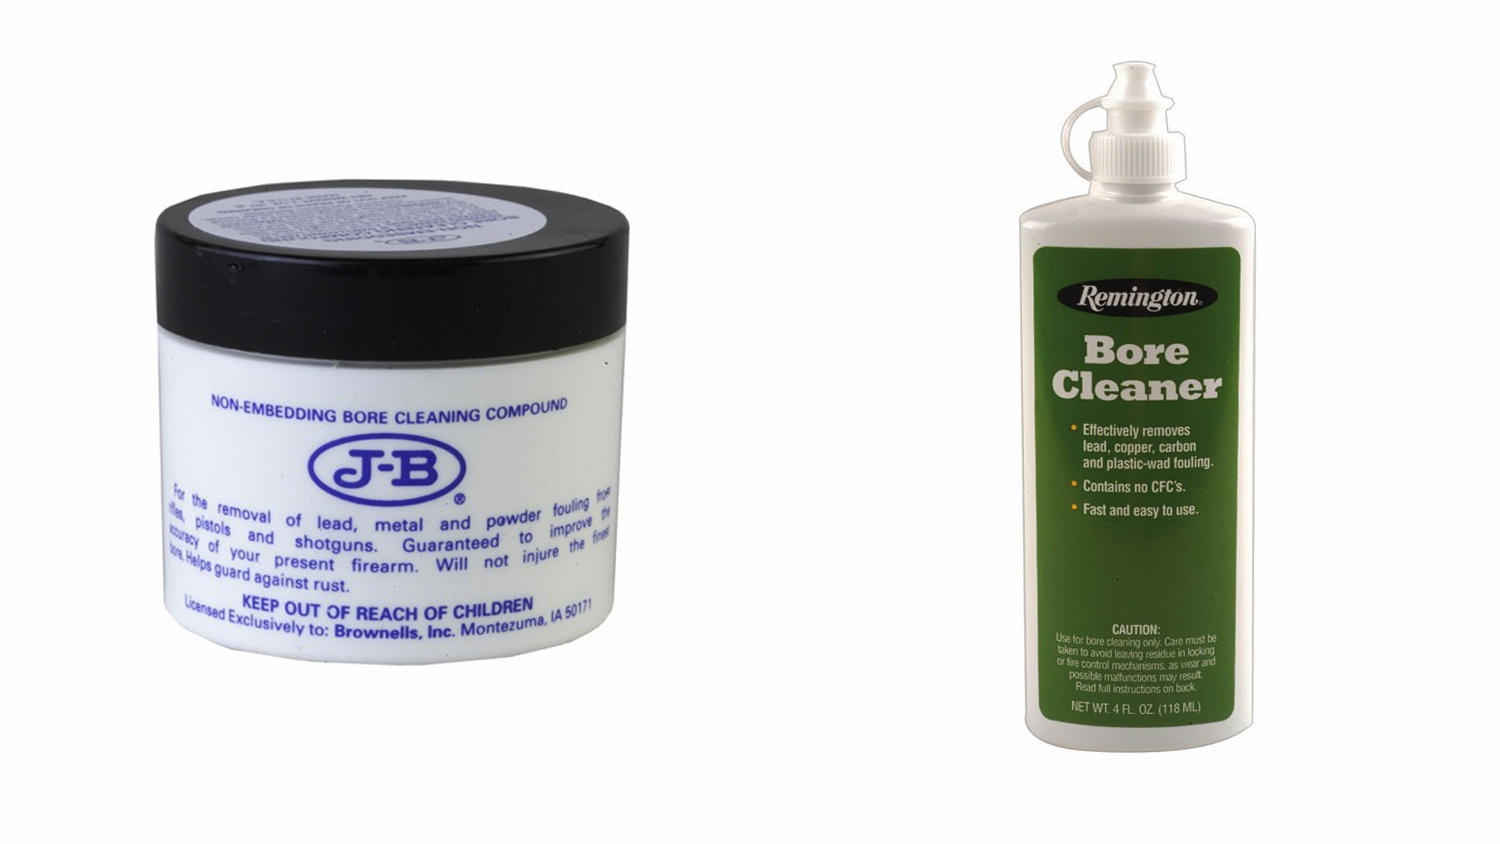 Bore cleaners from JB and Remington